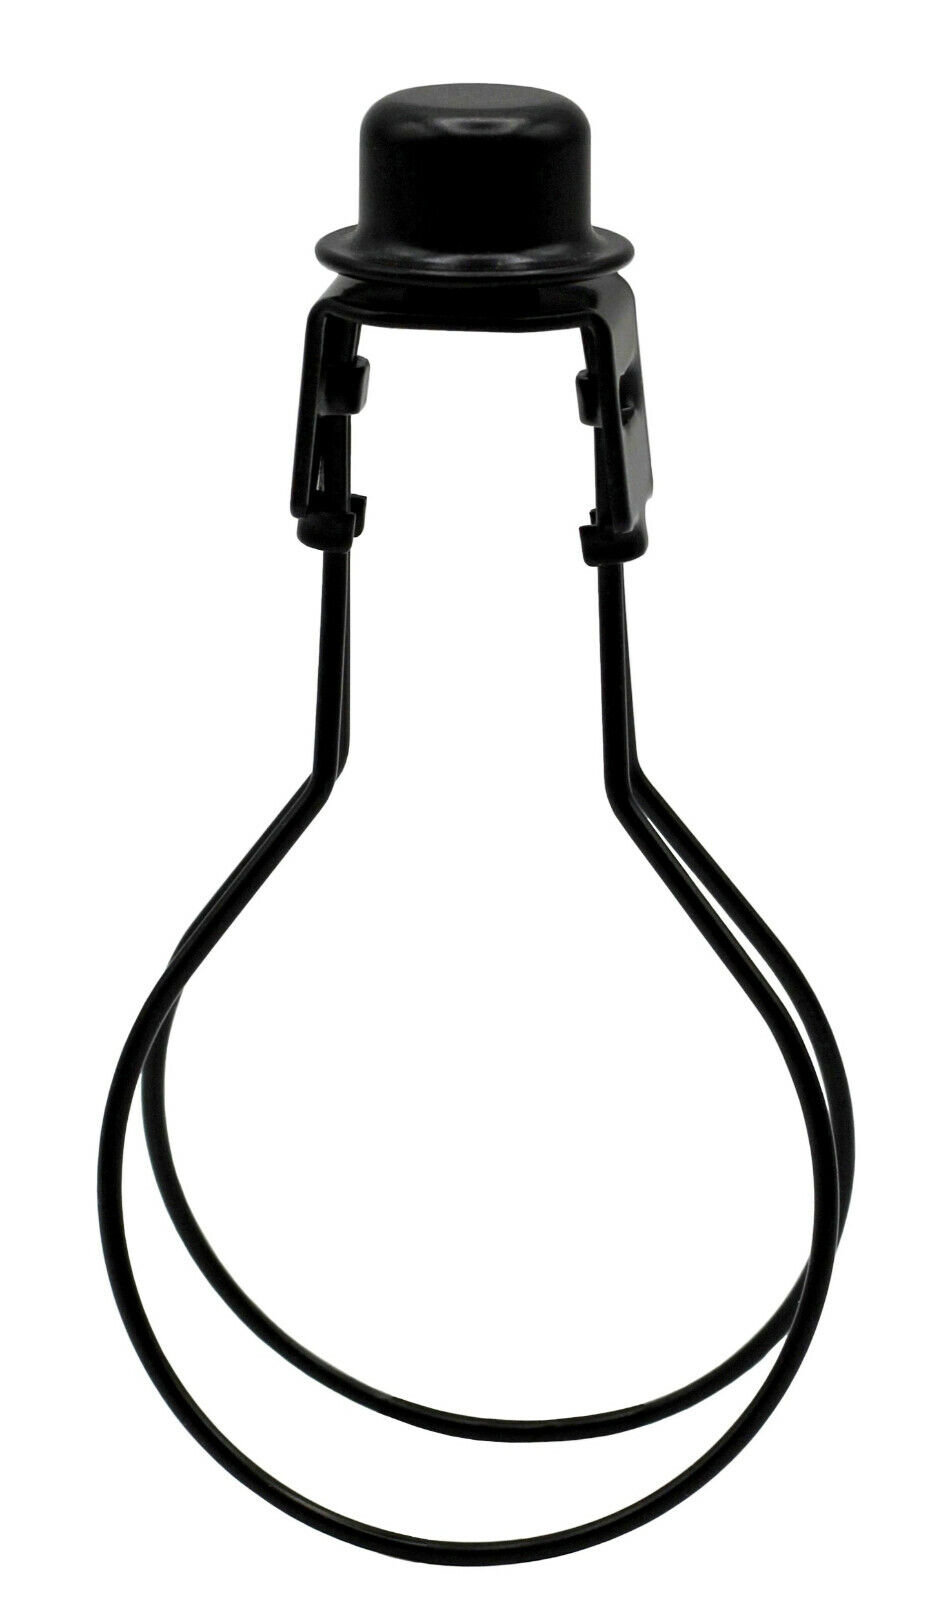 Lamp Shade Light Bulb Adapter Clip on with Shade Attaching Finial Top, Black